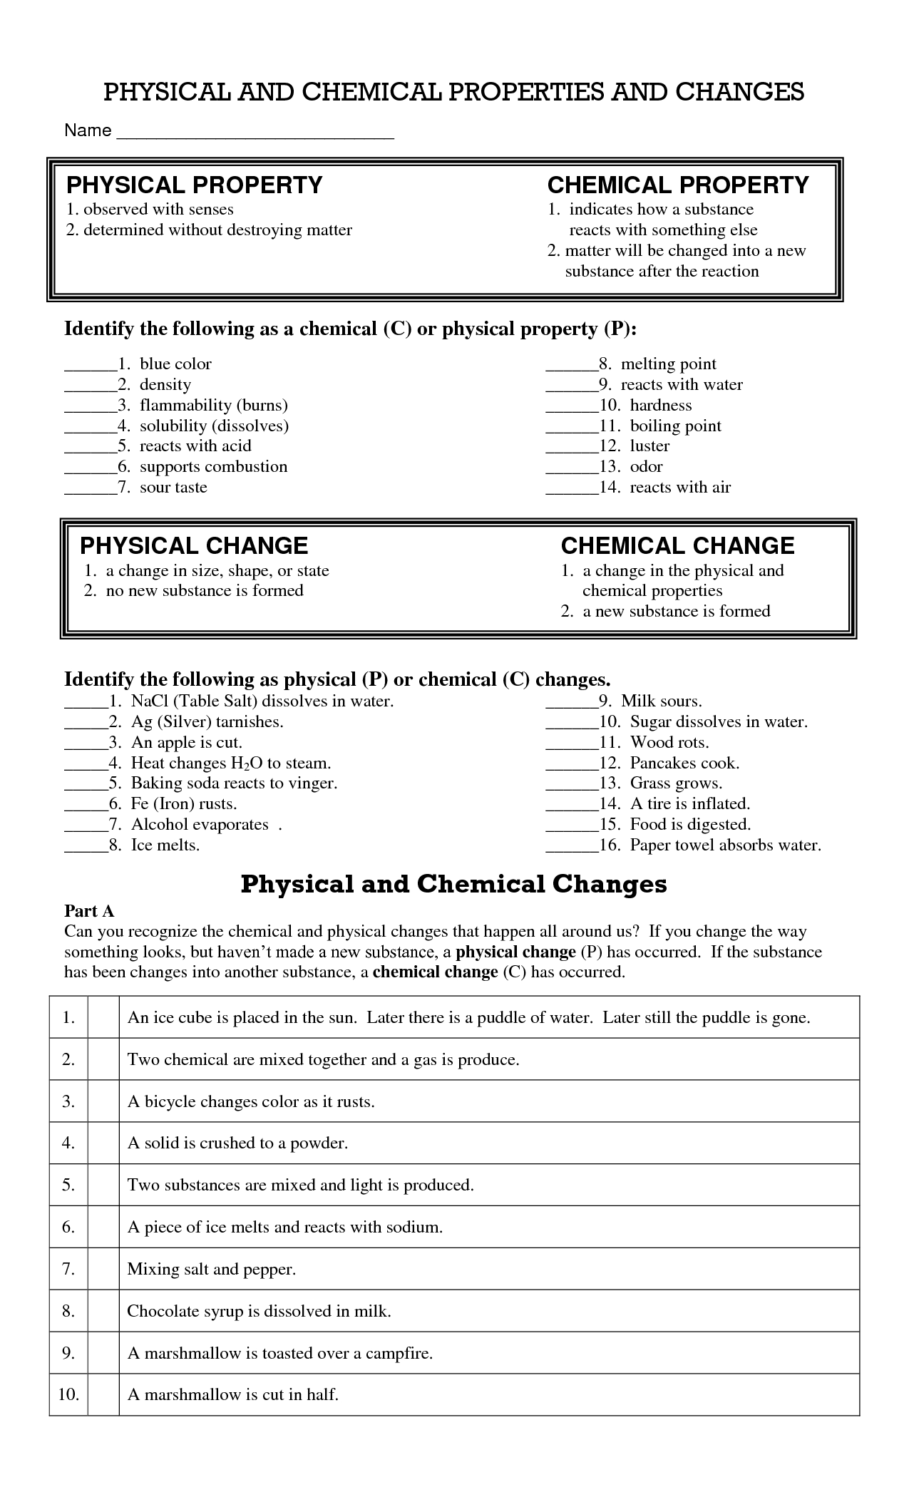 Proficiency Worksheet Physical And Chemical Changes Chemical And